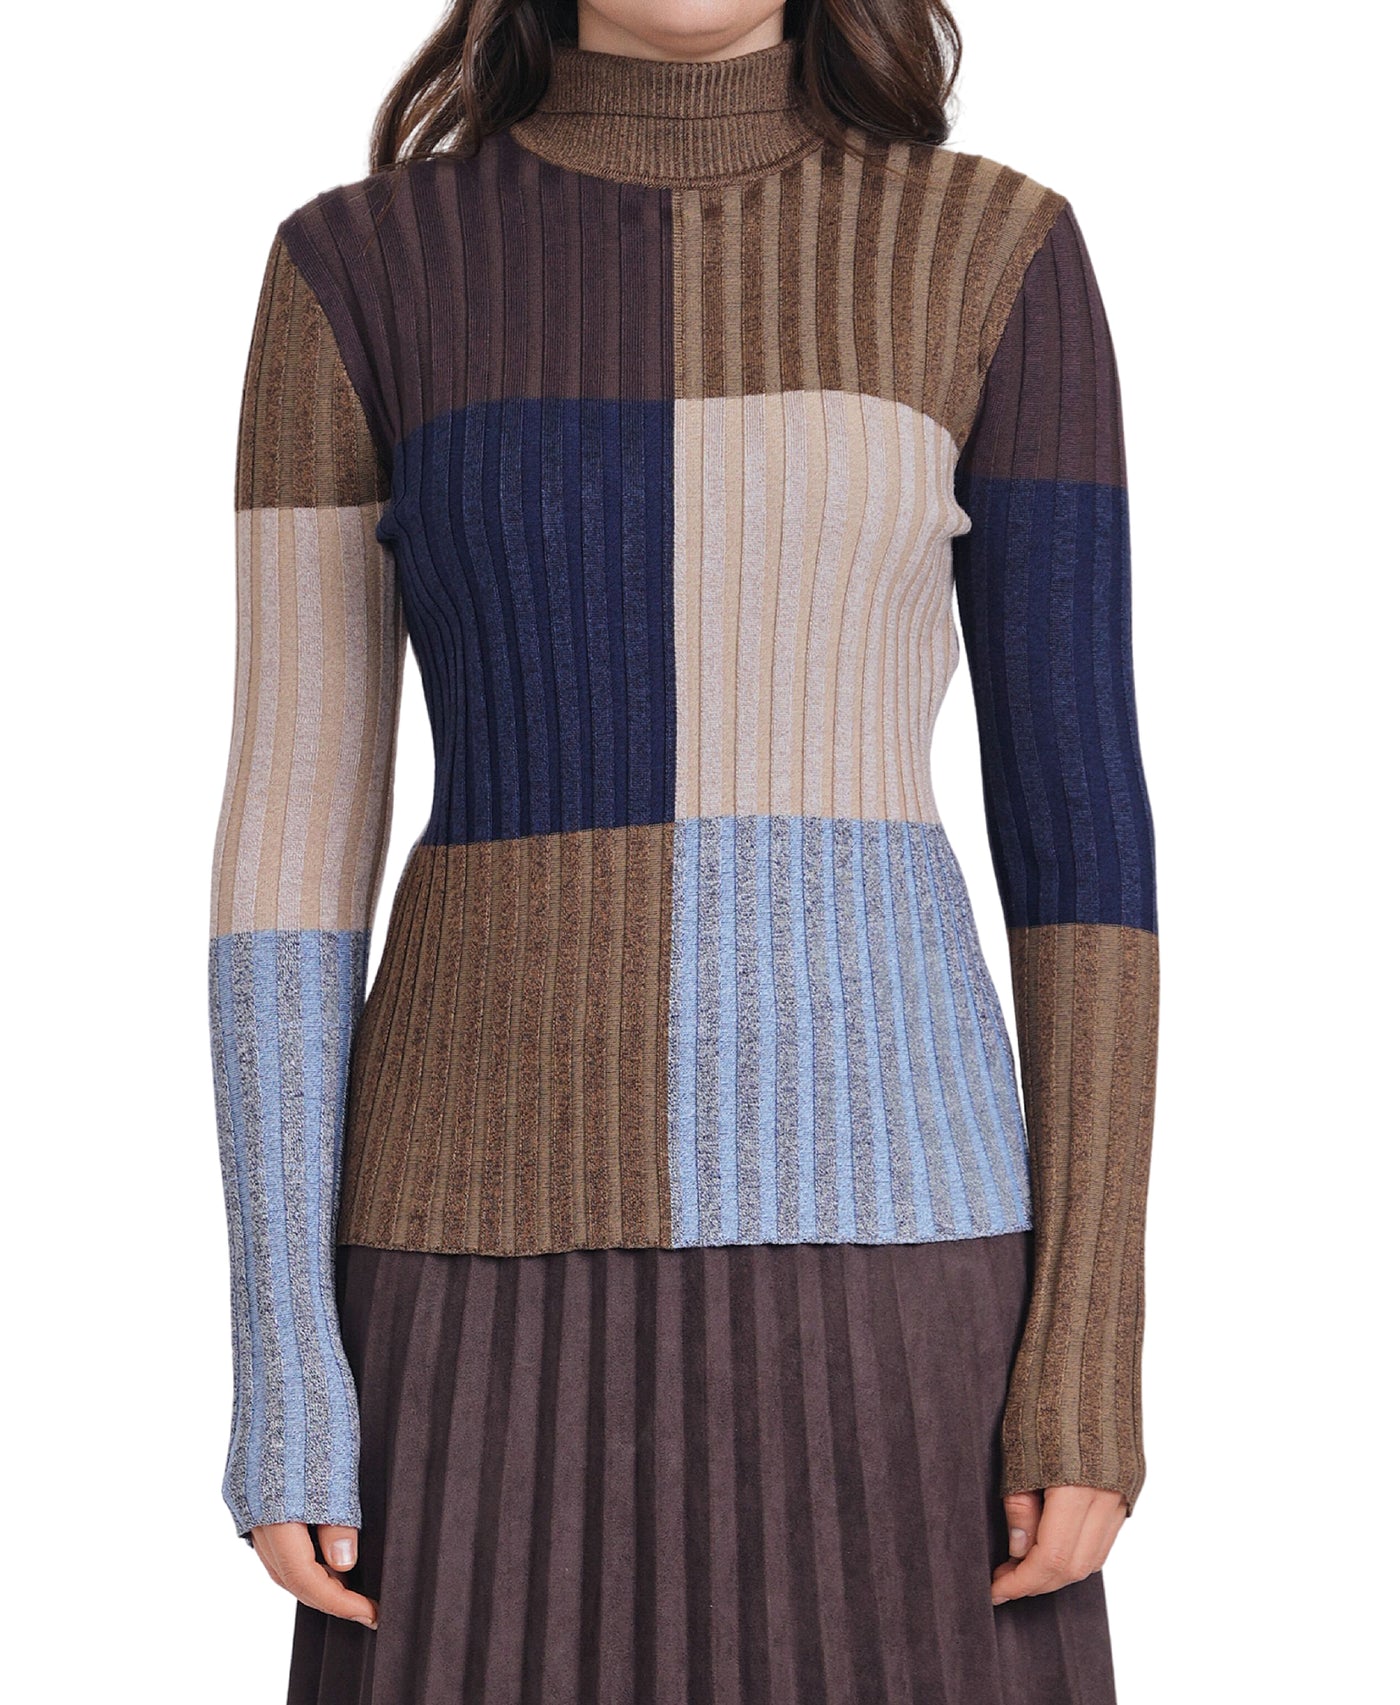 Knit Ribbed Colorblock Sweater image 1